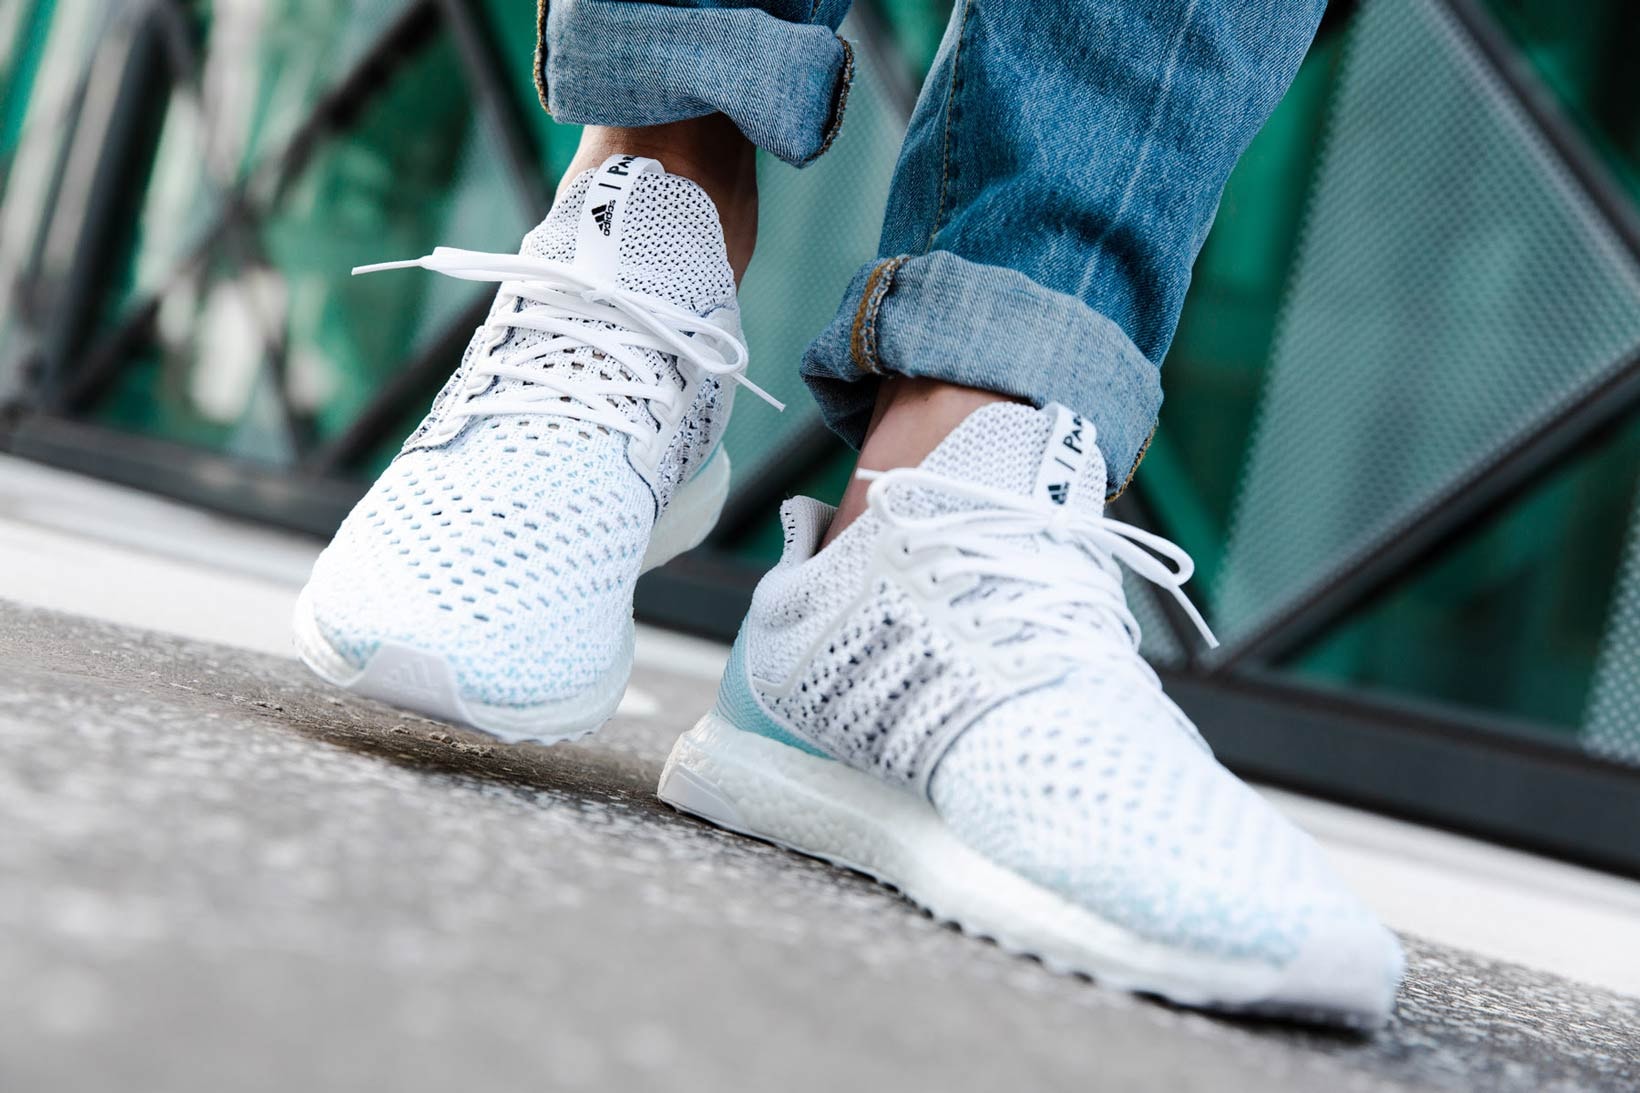 Parley adidas Originals UltraBOOST Blue White On Foot